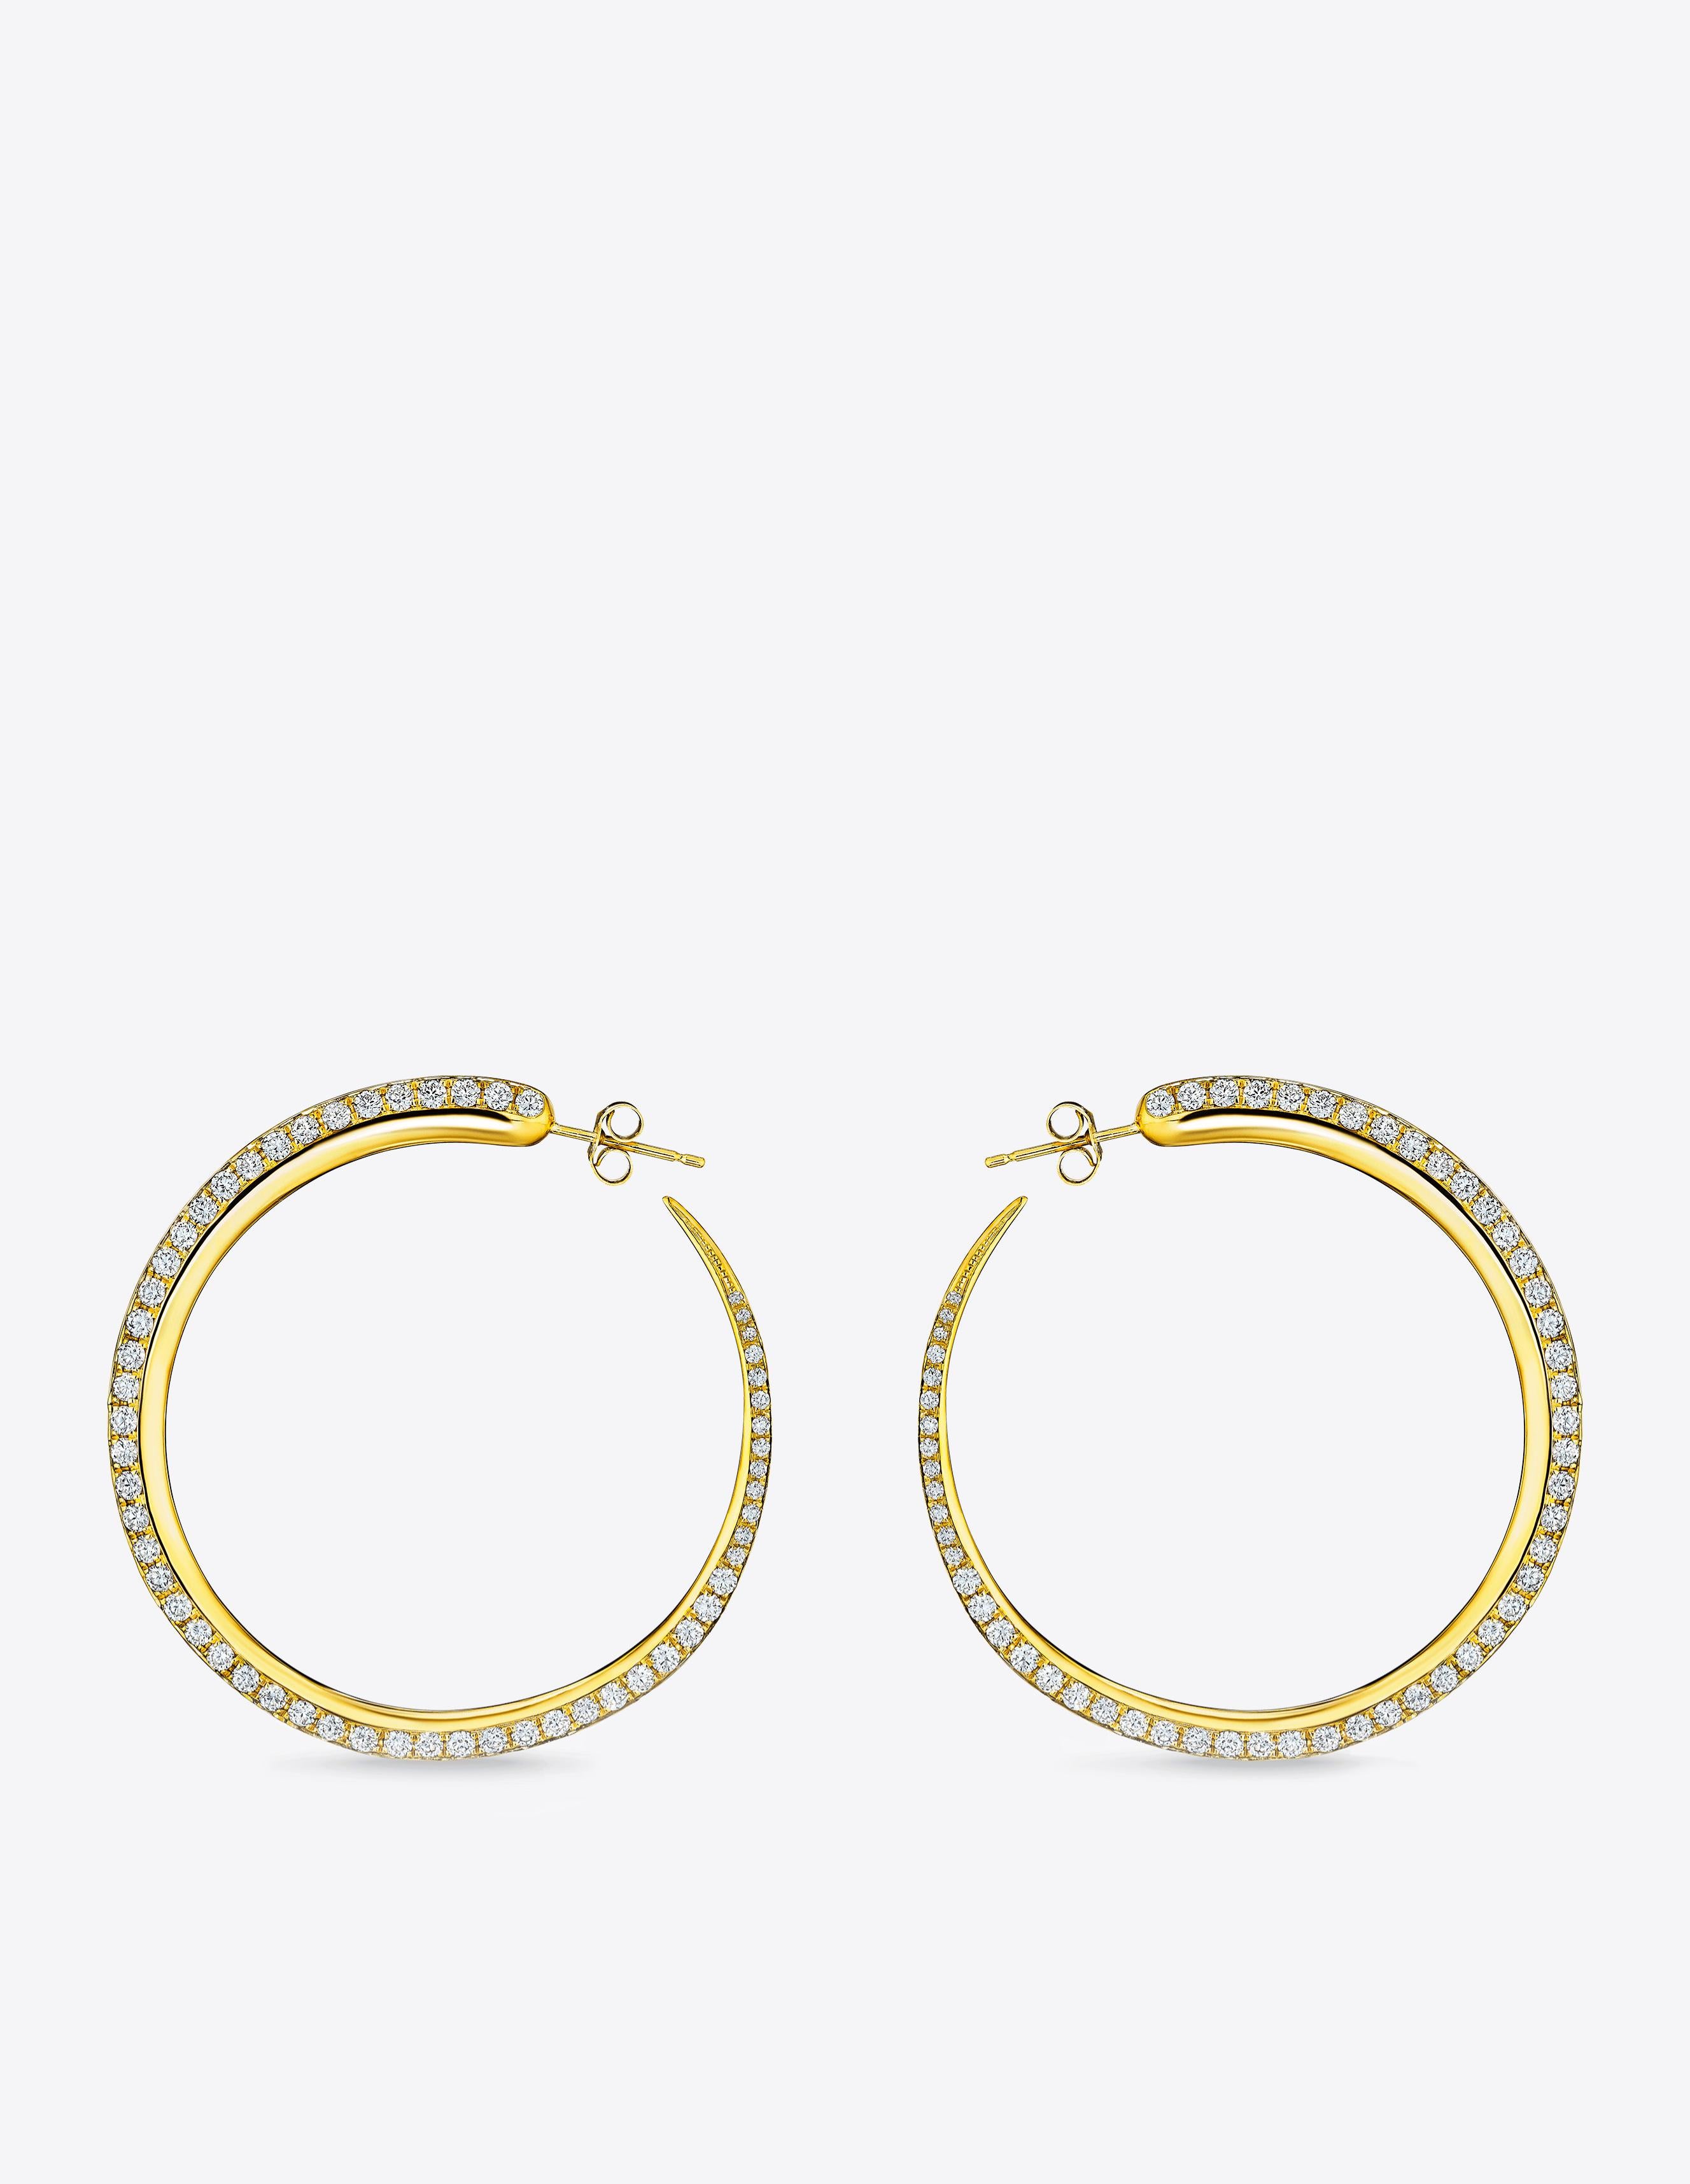 KHIRY Signature Khartoum Silhouette Hoops inspired by long horned cattle and set with Diamonds for added sparkle. 2 inch drop with butterfly fastening for pierced ears.


This item is produced made-to-order and has a 3-6 week production lead time. 